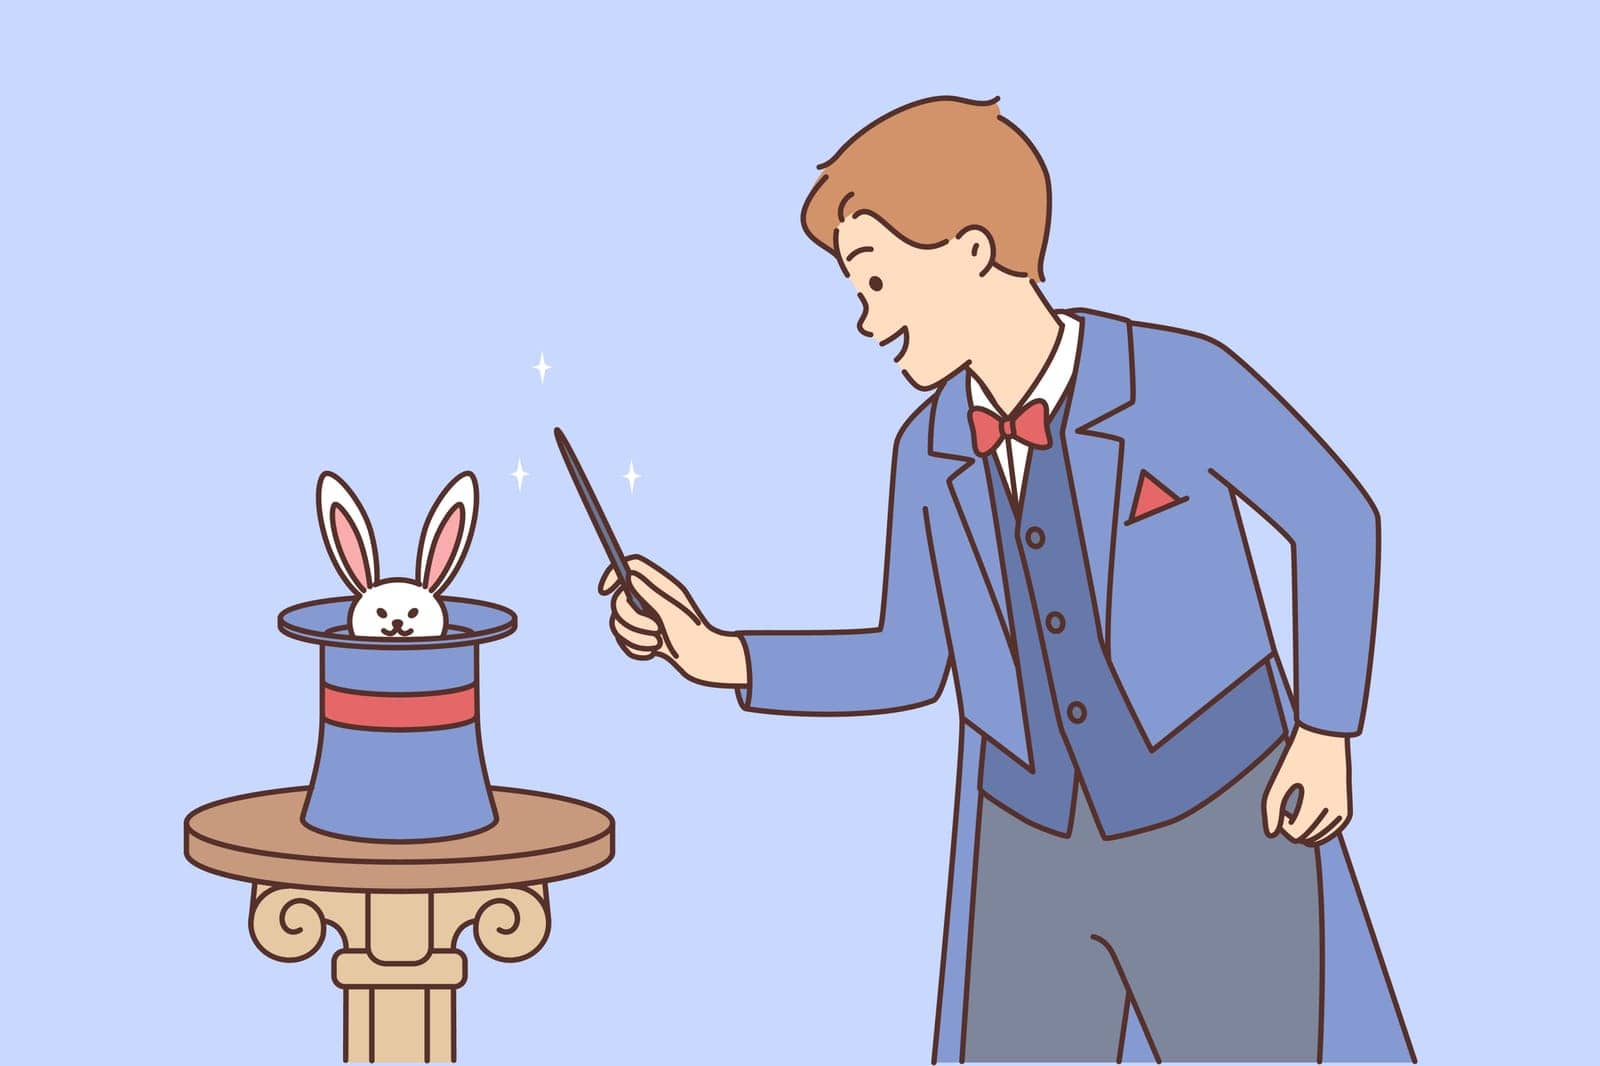 Man magician with wand stands near hat in which rabbit is hiding in preparation for unexpected stunt. magician performs in front of audience showing magic show with amazing tricks